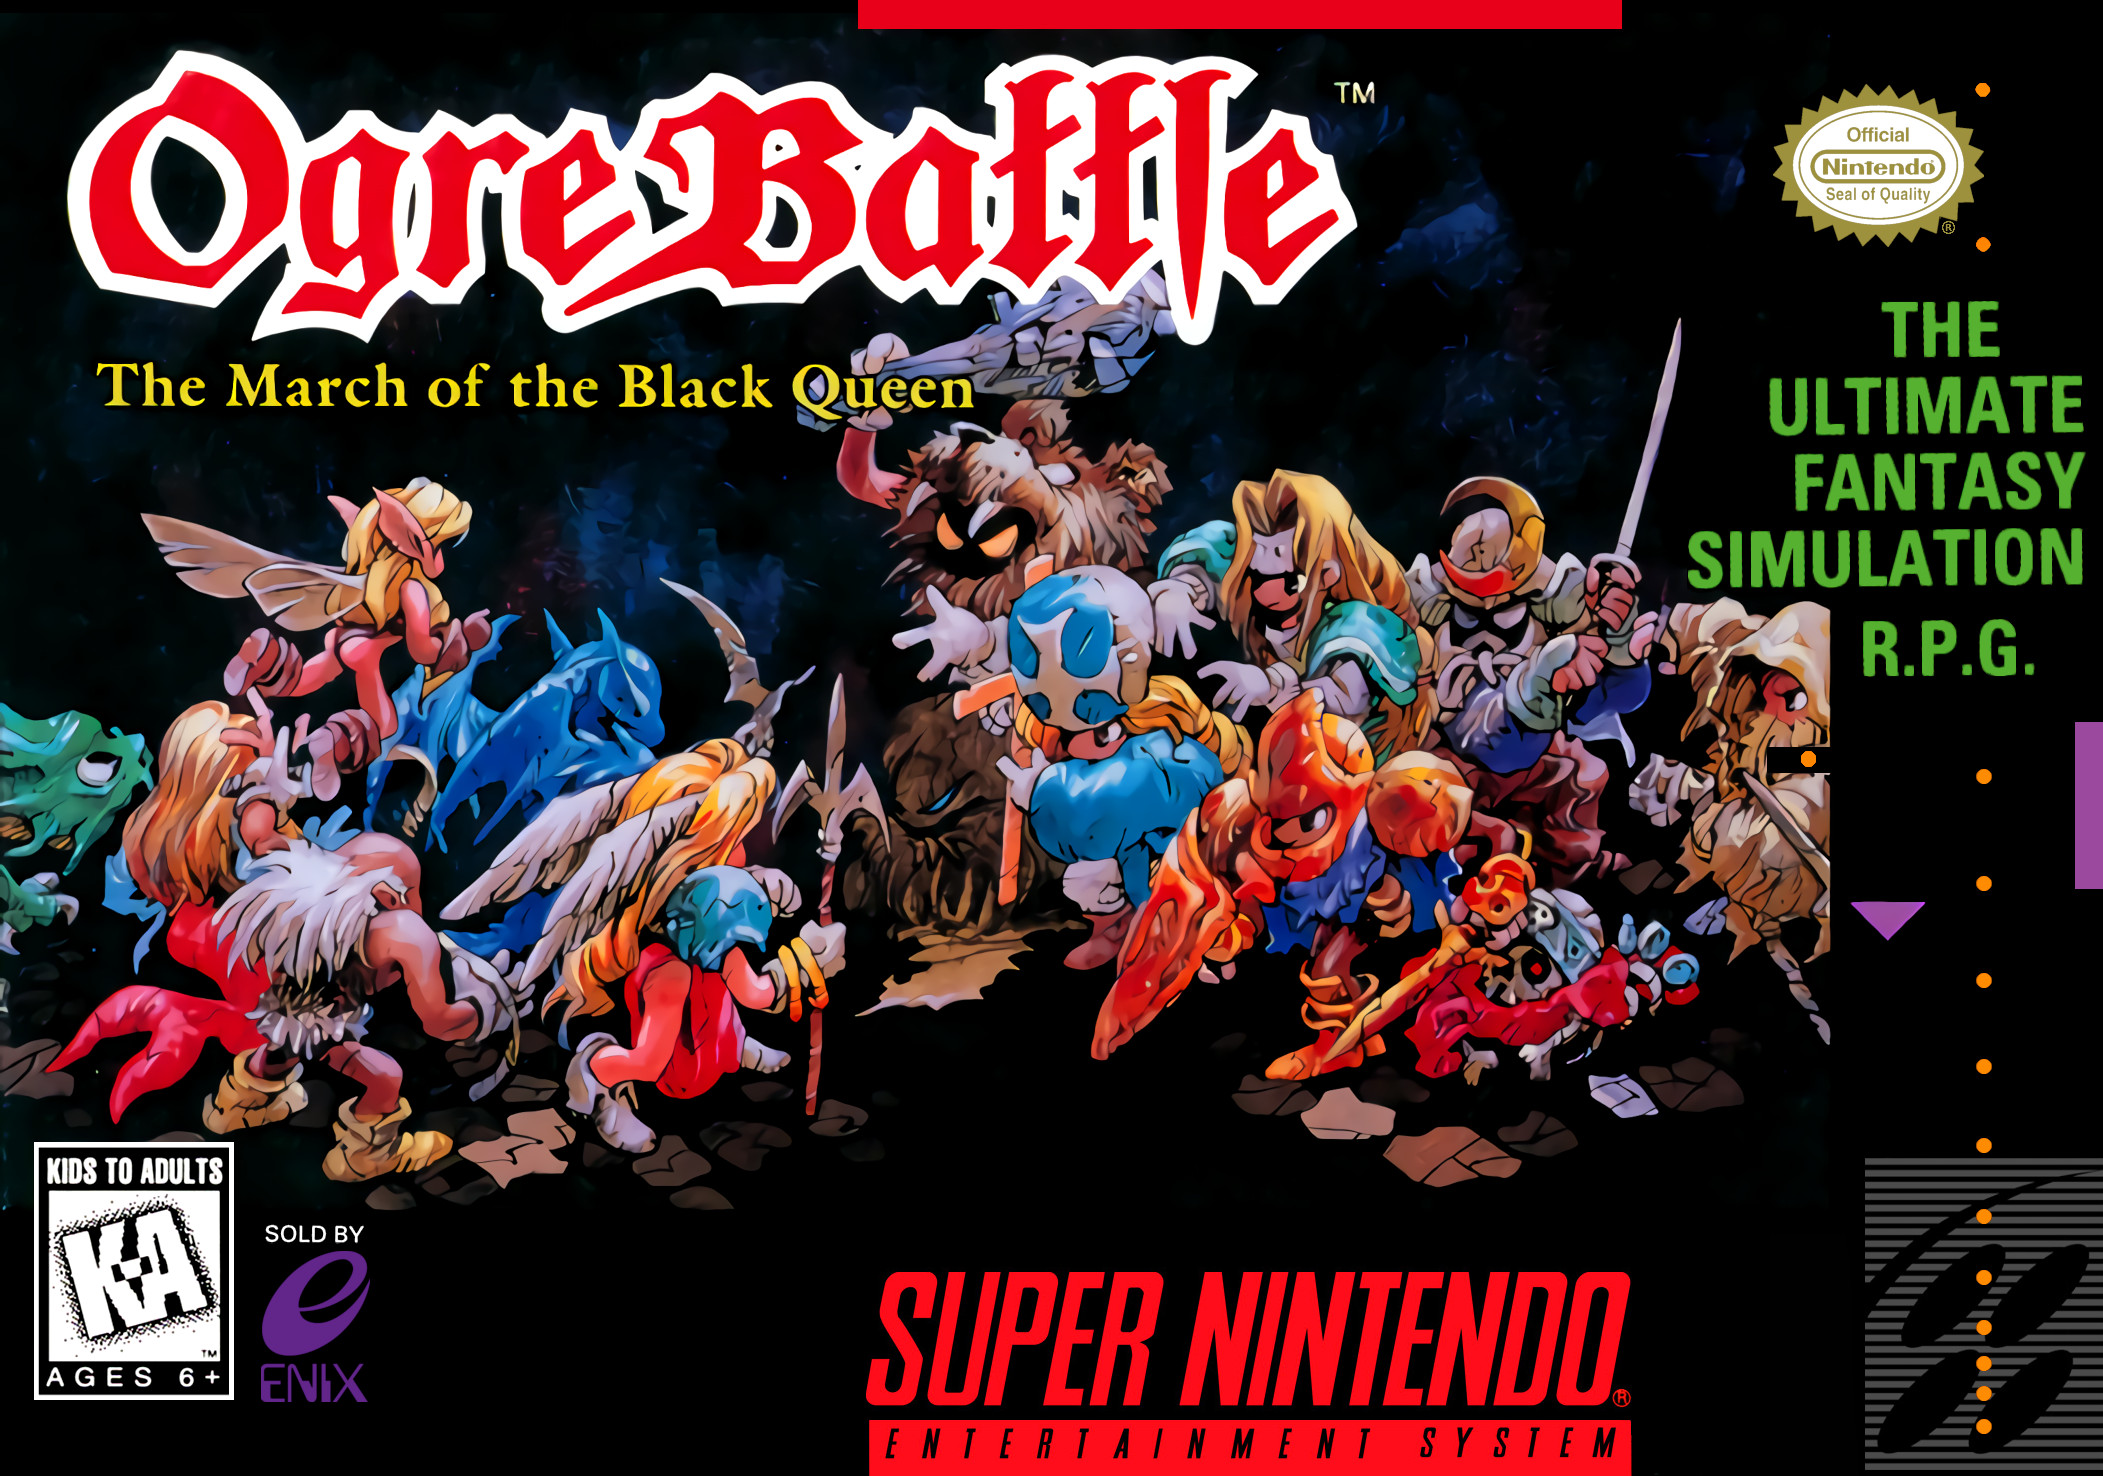 ogre-battle-the-march-of-the-black-queen-details-launchbox-games-database